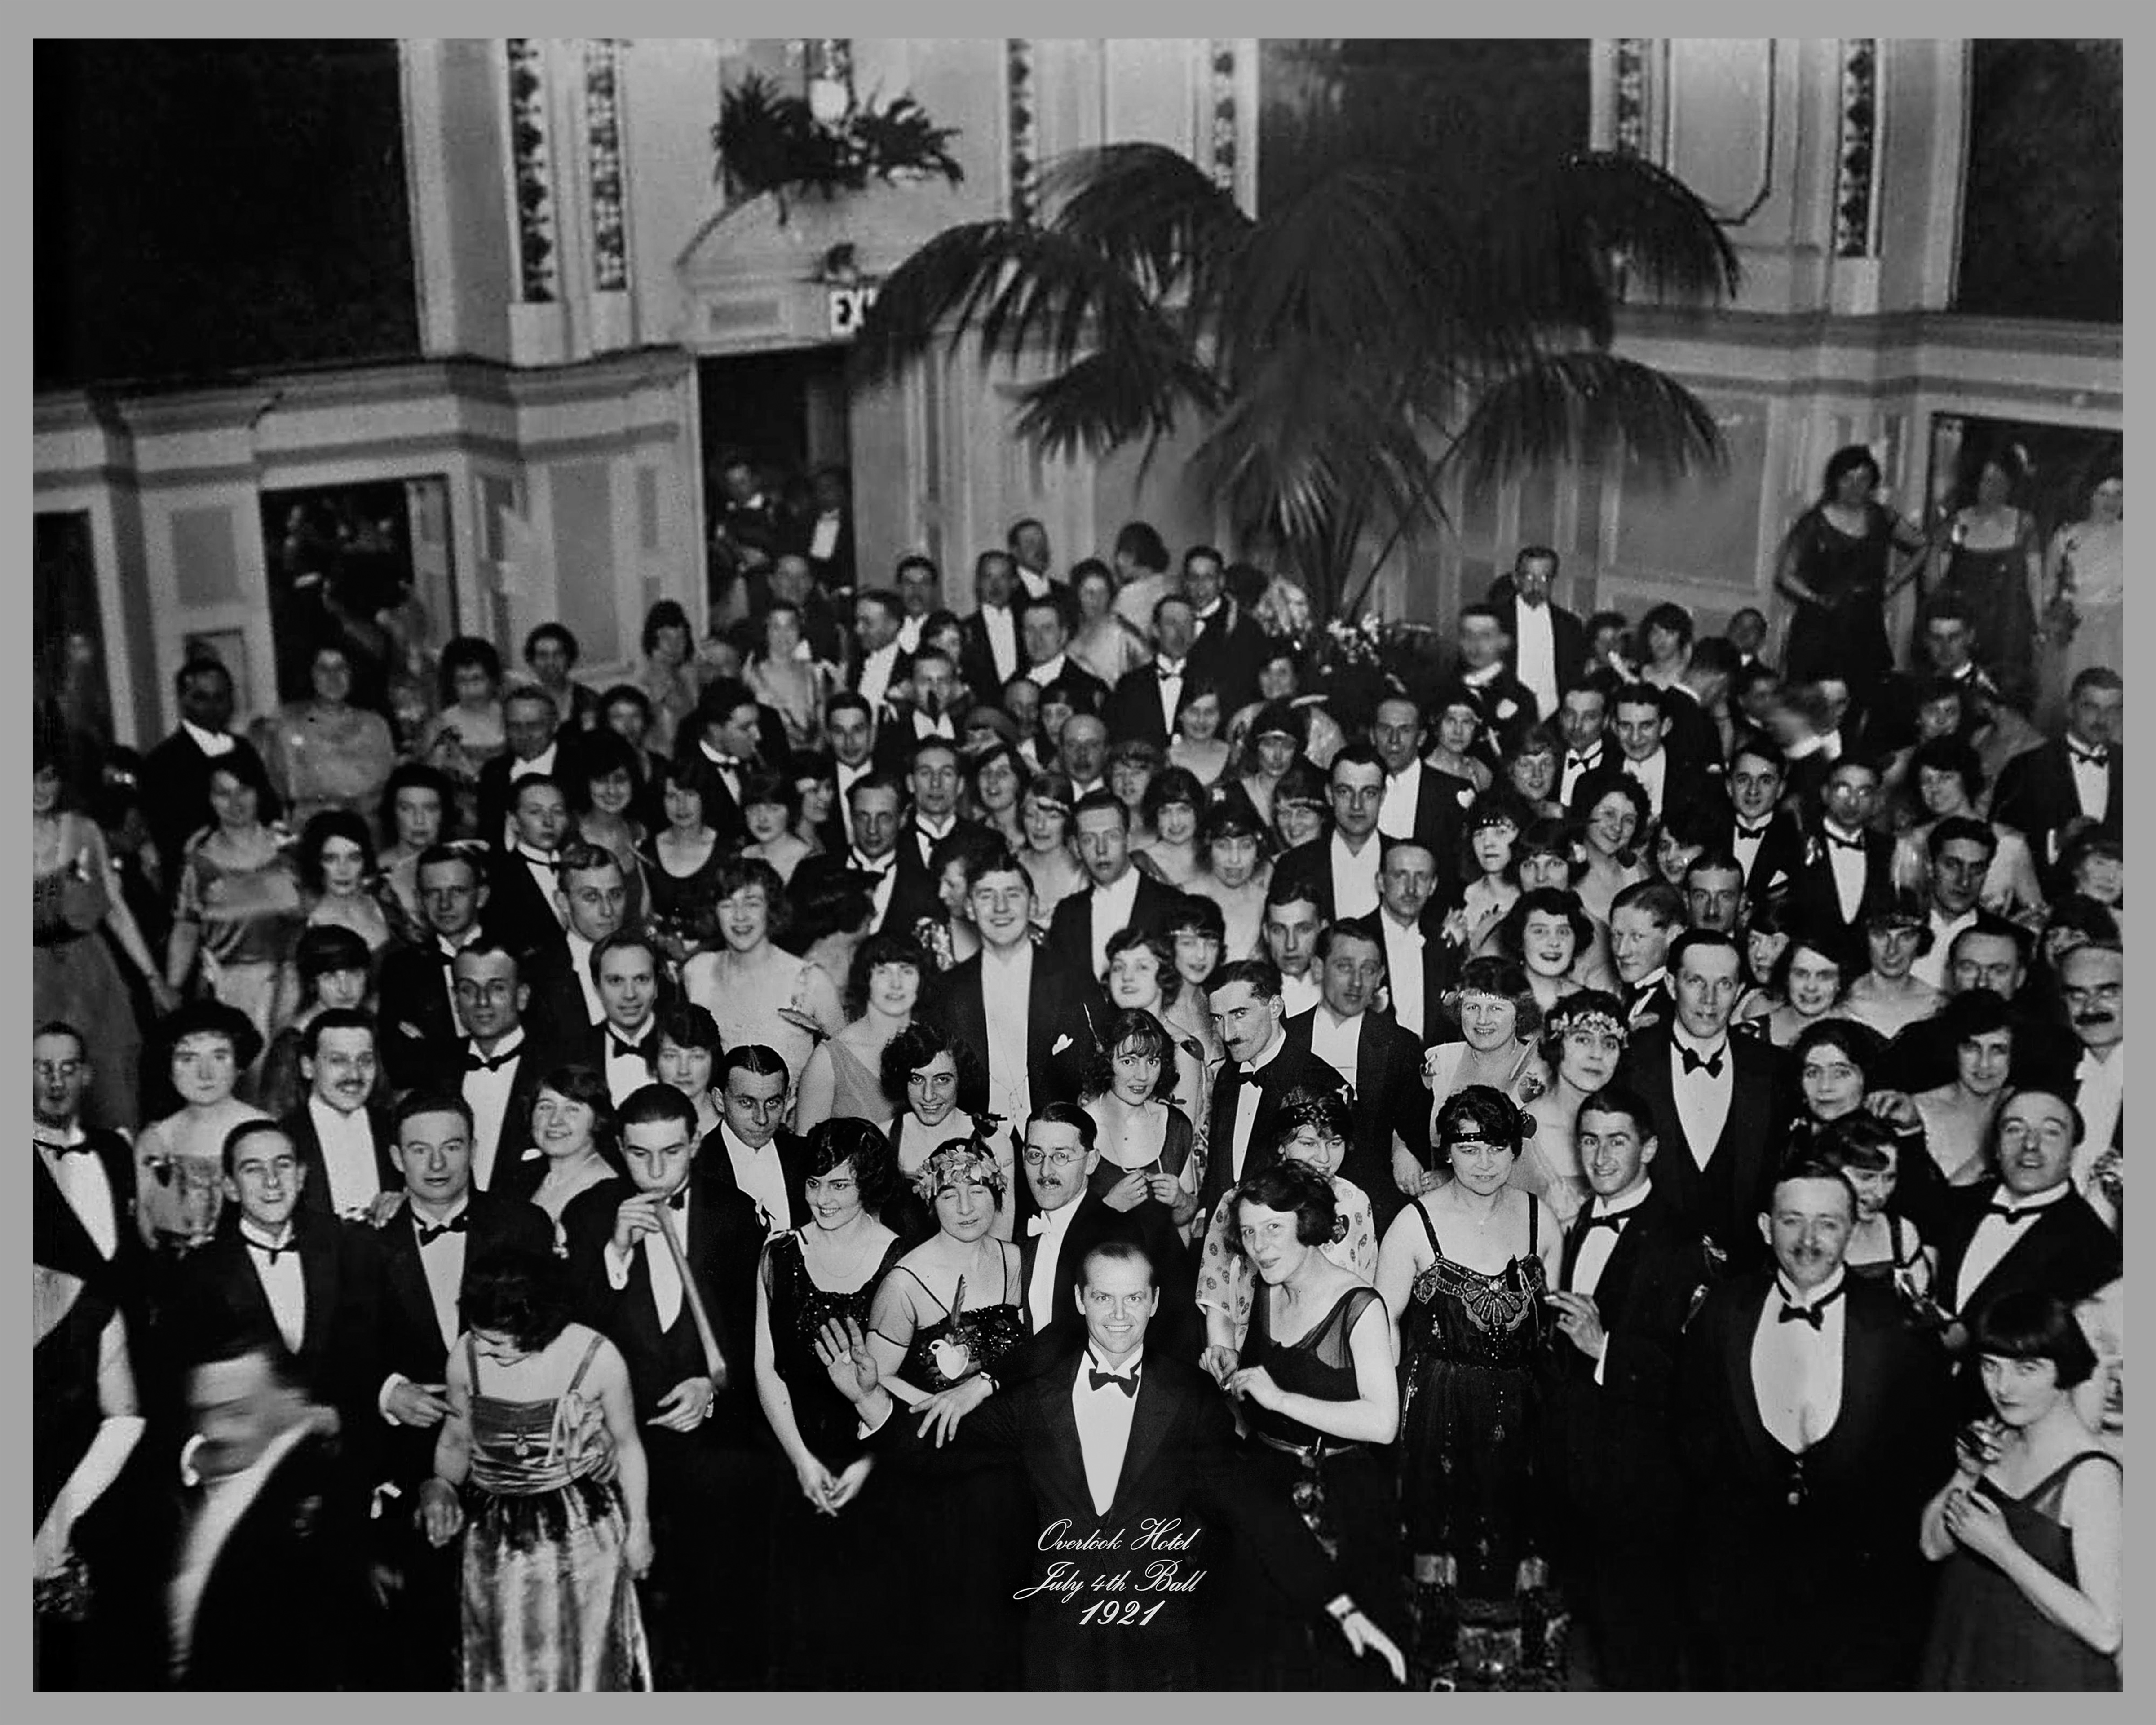 Overlook Hotel - July 4th Ball Picture - The Shining